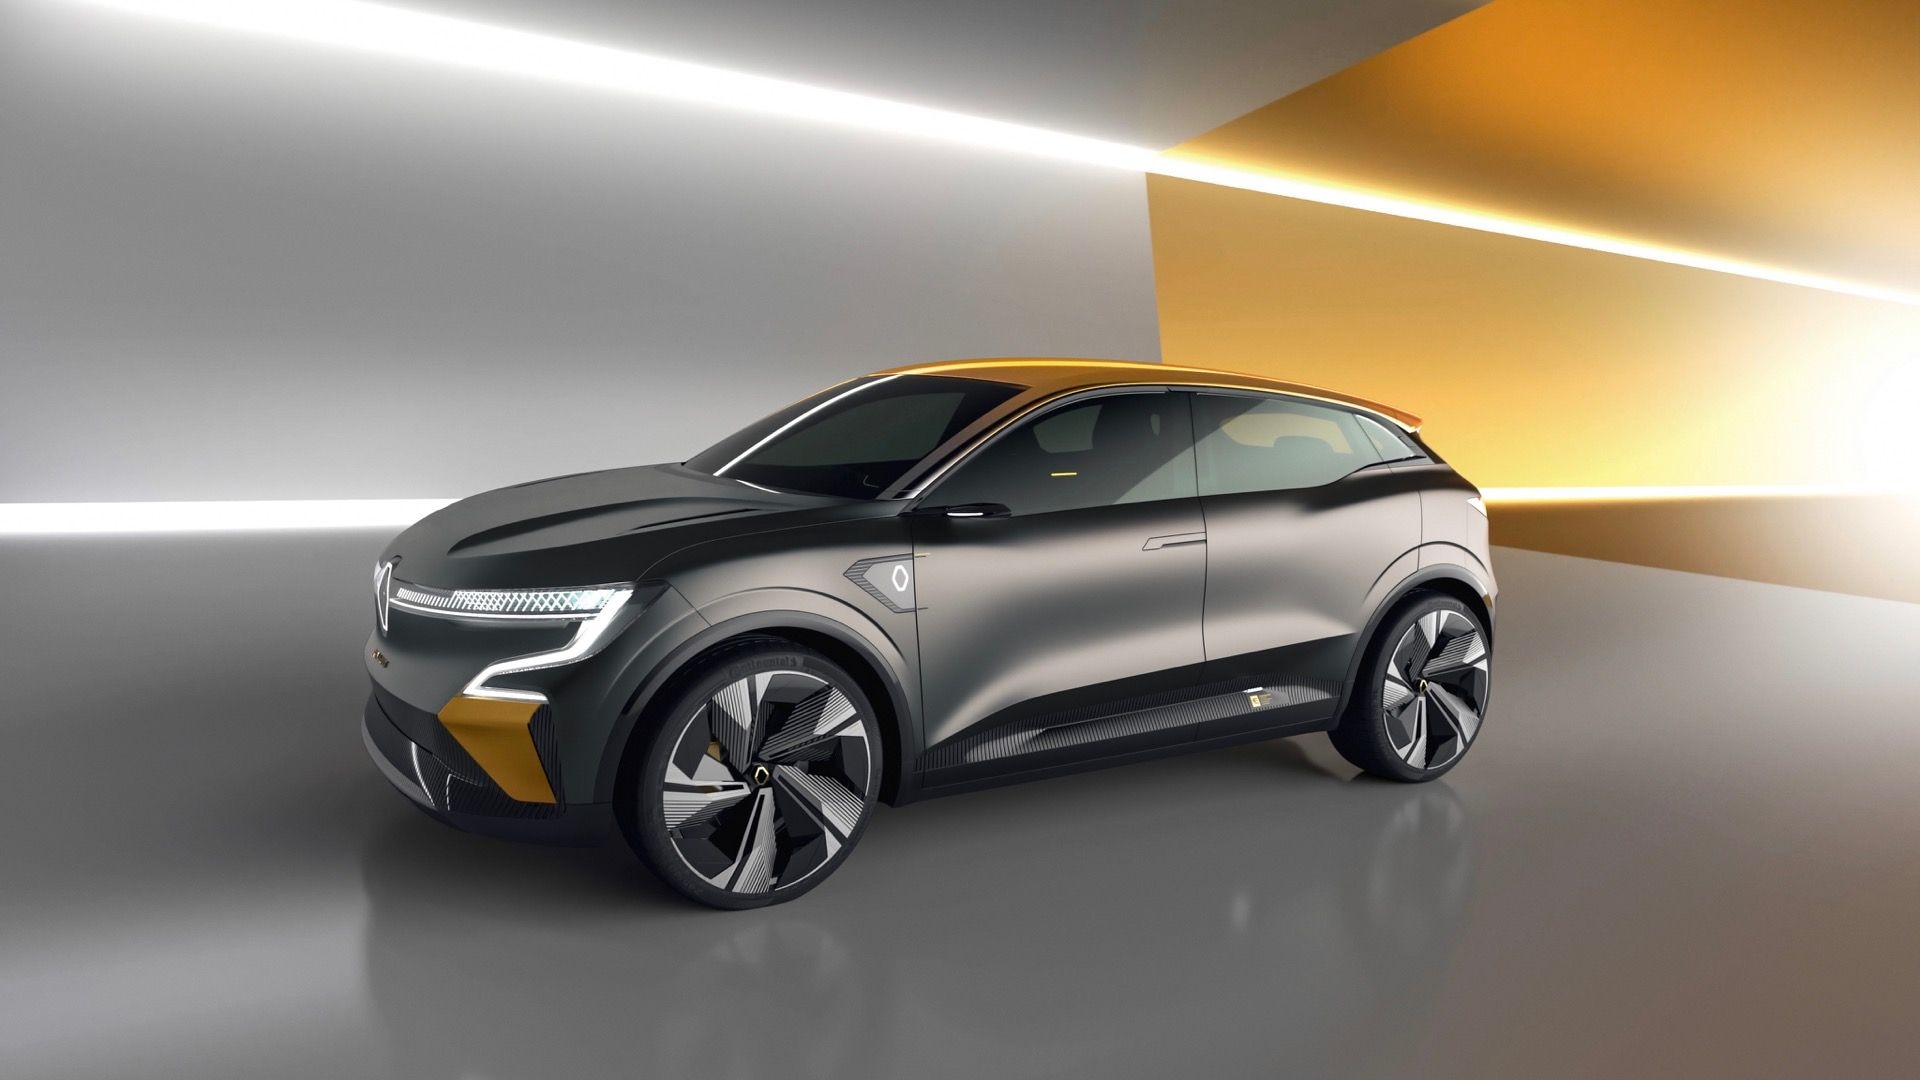 Renault Mégane eVision concept shows an electric future for